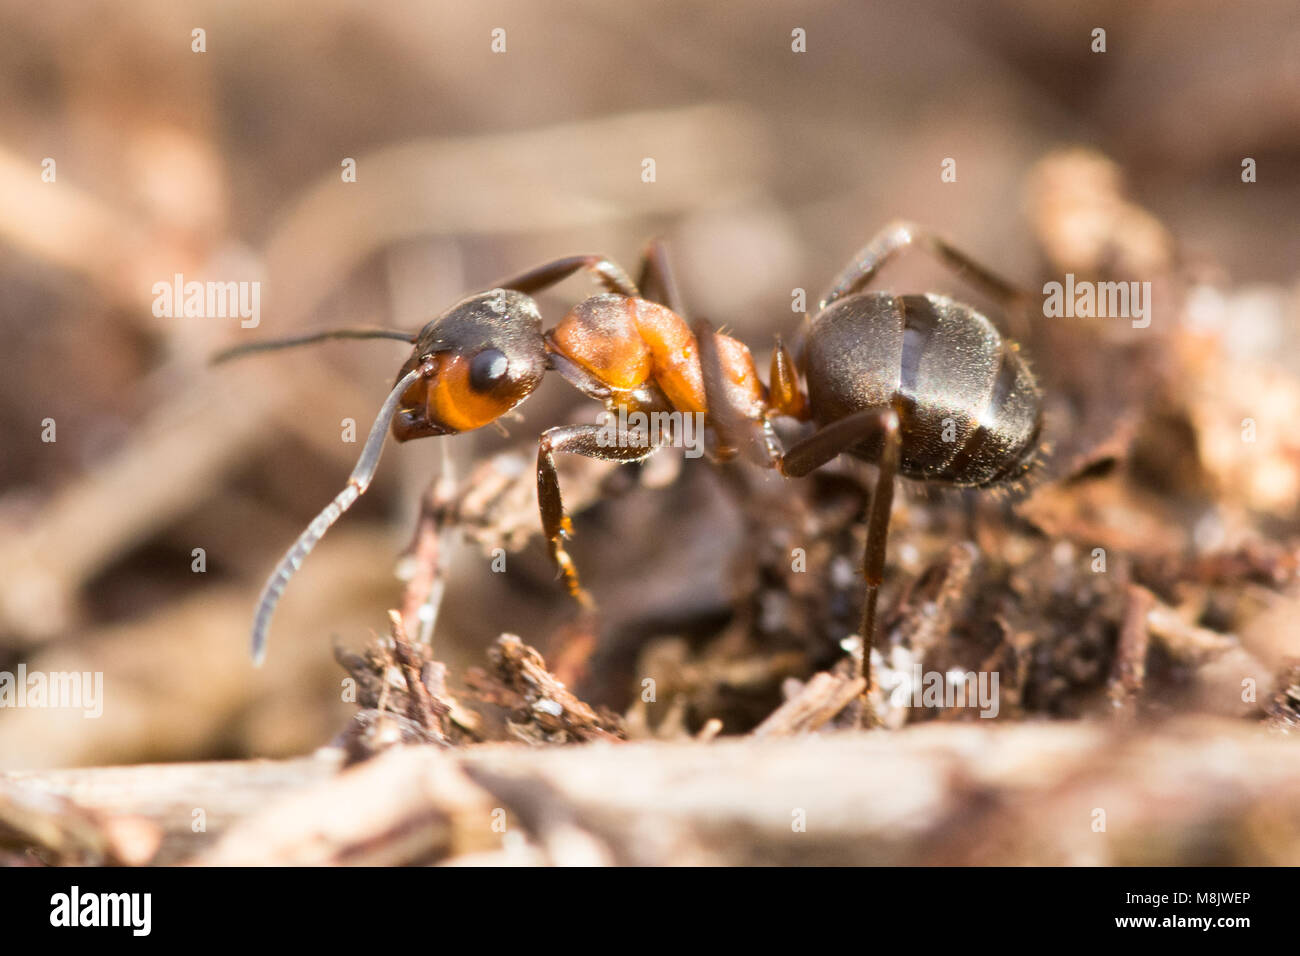 Close-up of Southern wood ant (Formica rufa) Stock Photo